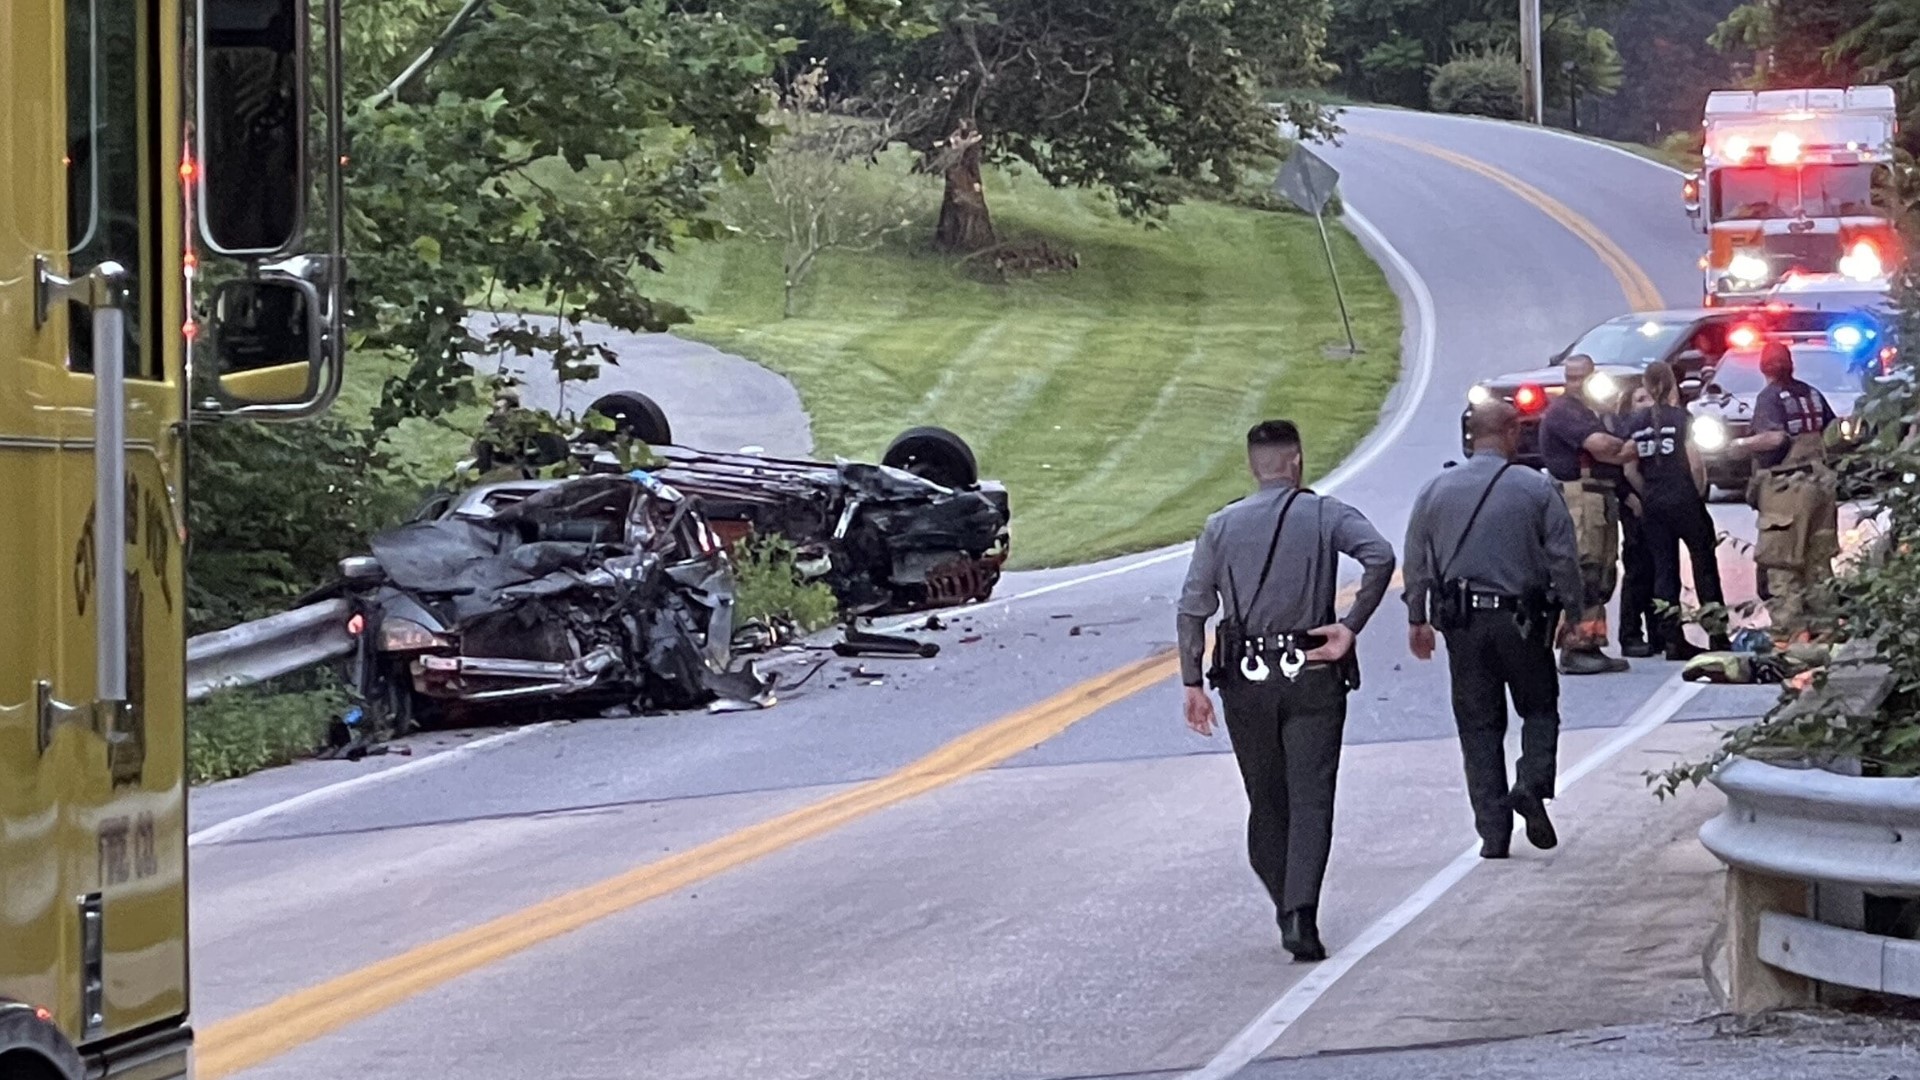 Two vehicles were involved in the crash, according to Dispatch. The surrounding area of Route 851 is closed, and officials are unsure how long it will remain blocked